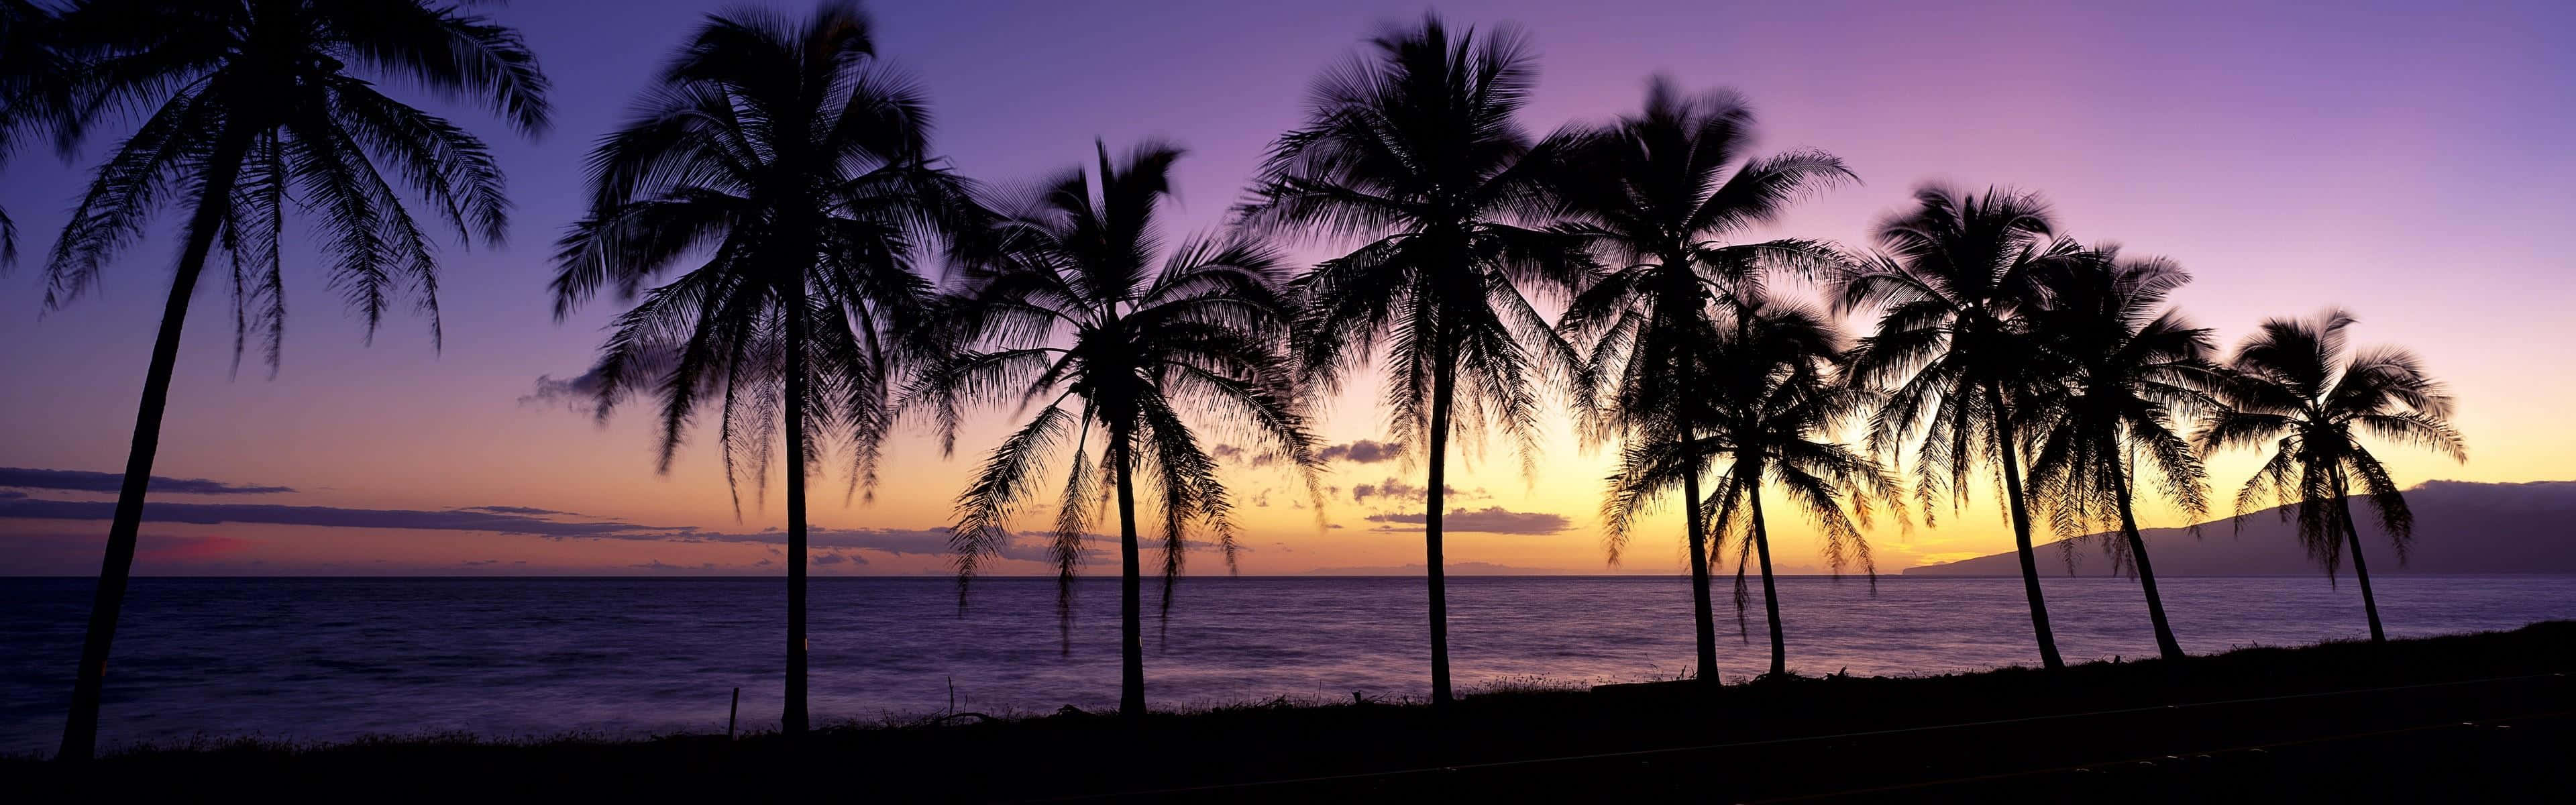 A Sunset With Palm Trees In The Background Wallpaper